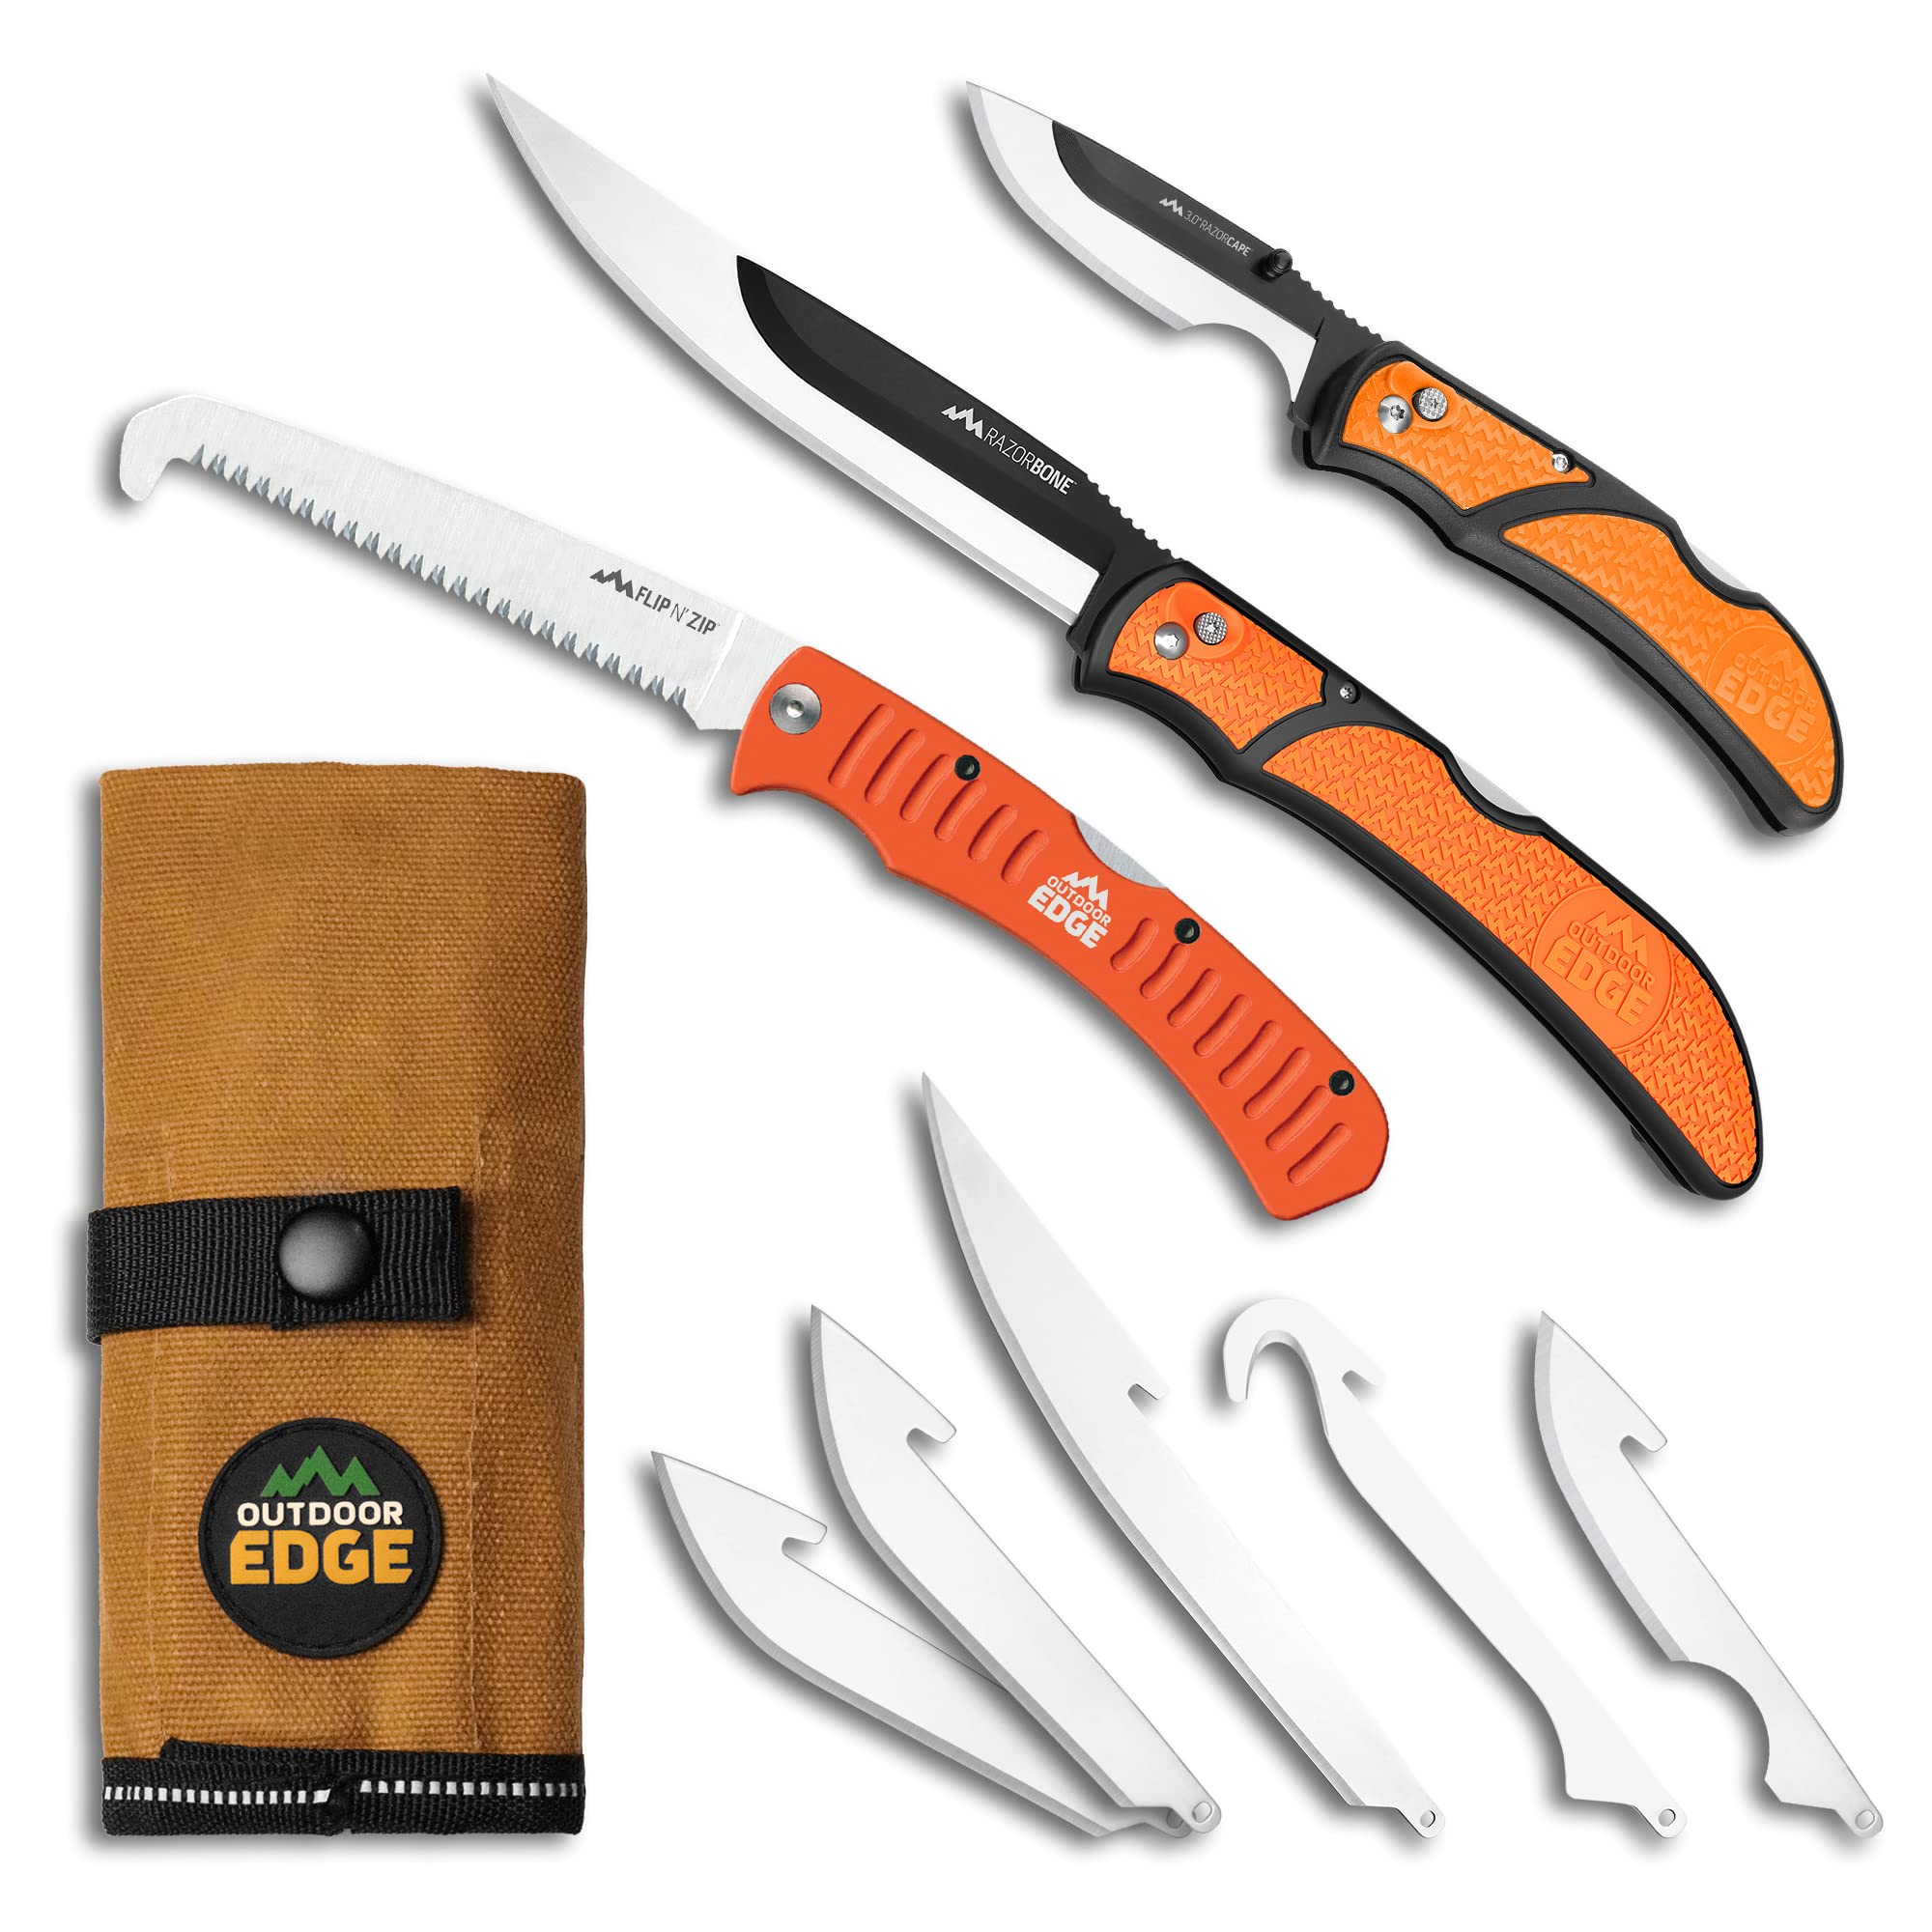 OUTDOOR EDGE Razor-Guide Pak, Includes RazorBone & RazorCape Replaceable Blade Knives & Flip N Zip Saw, all in a Compact Waxed Canvas Roll Pack